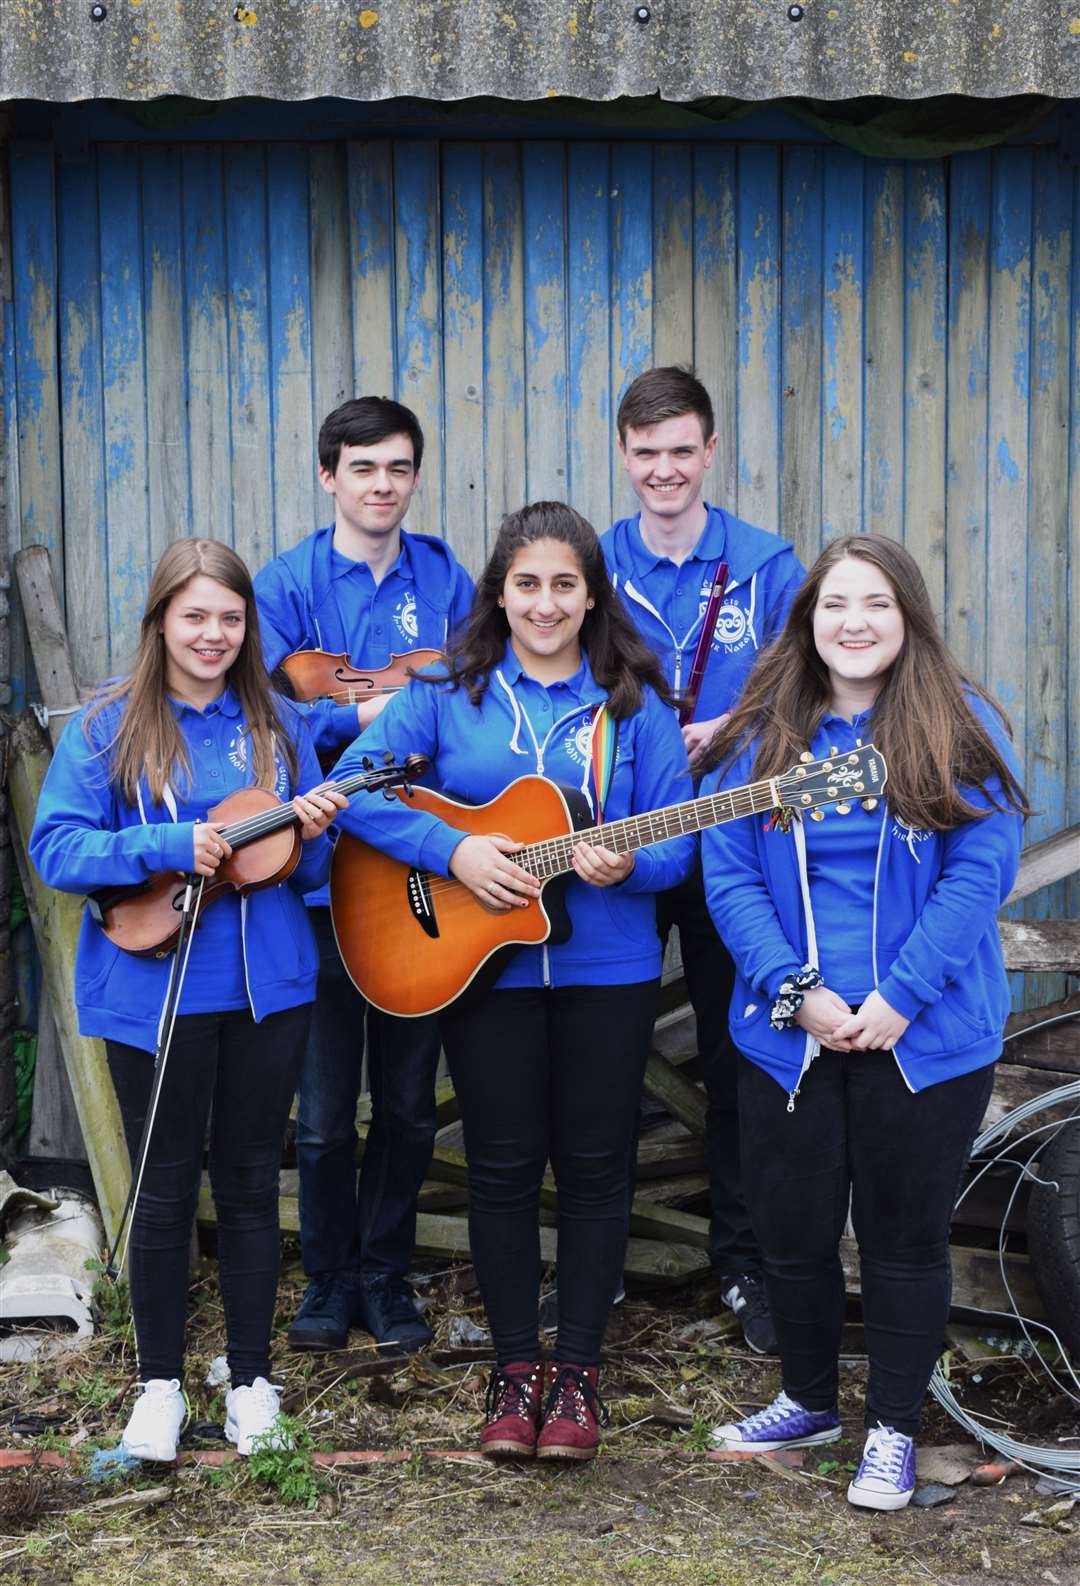 The Fèis Inbhir Narainn Cèilidh Trail musicians from 2019, when the event was last held in person.